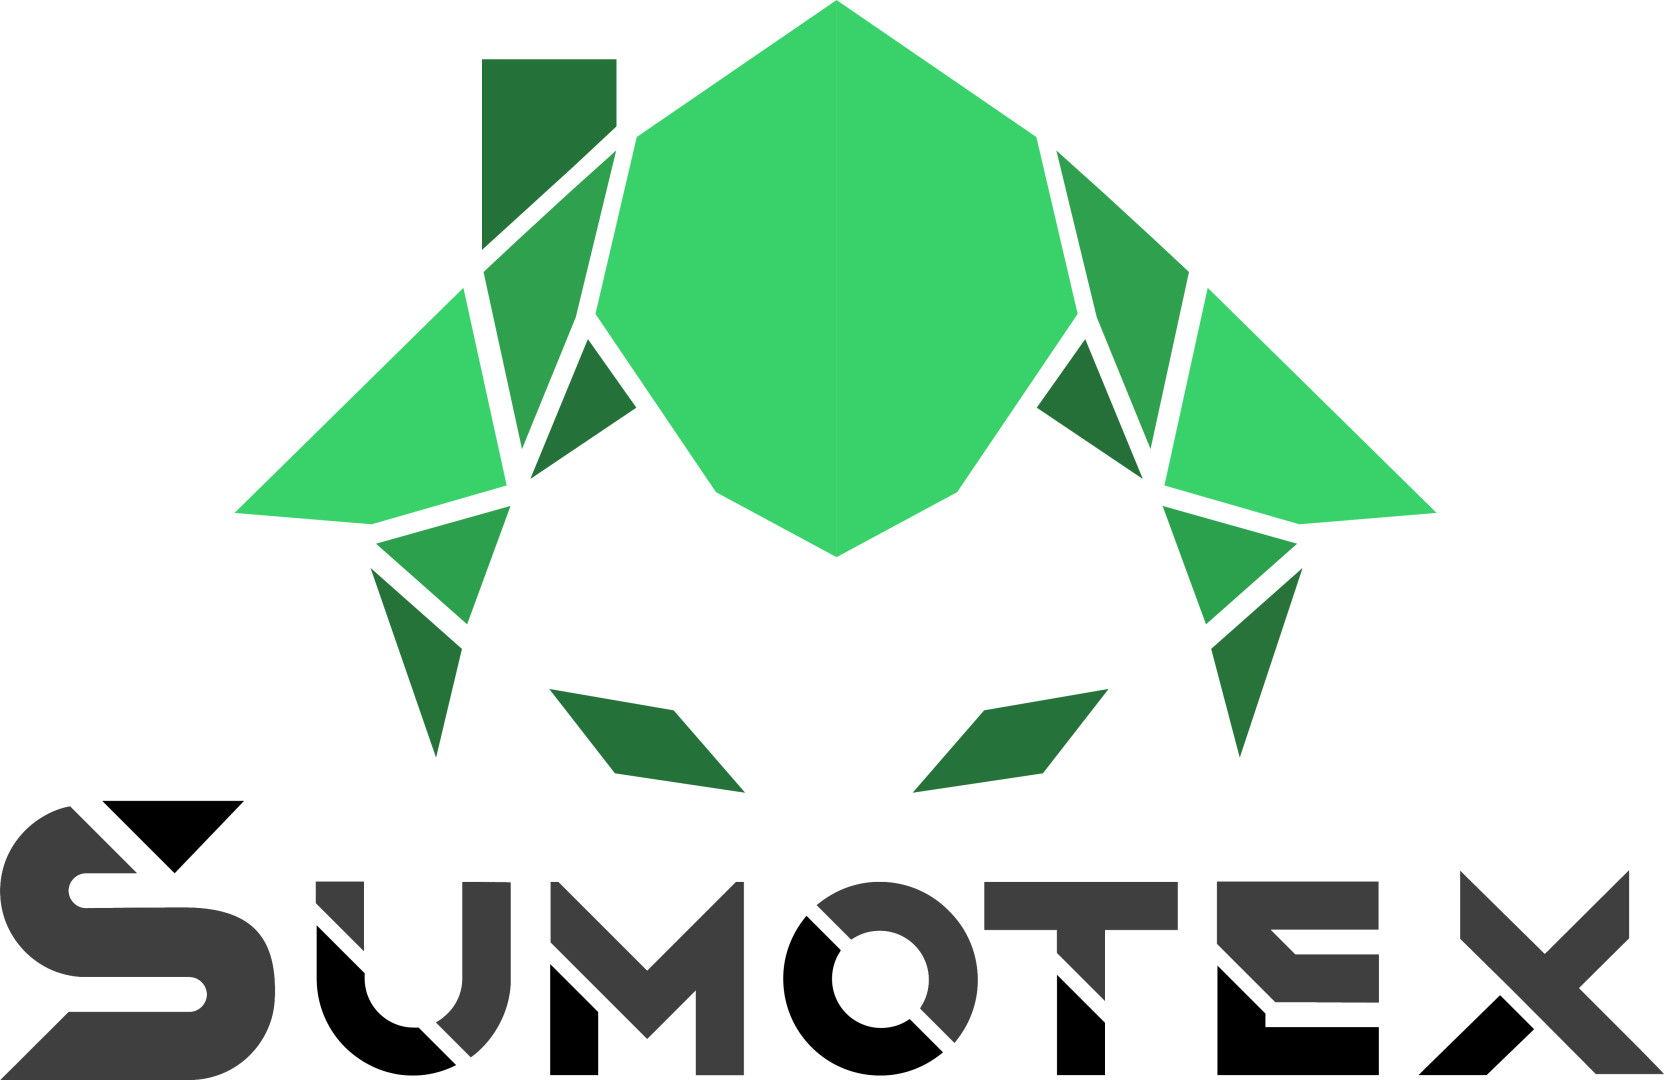 sumotex-presale-goes-live-first-protocol-to-spearhead-usd-250-mil-tvl-tokenisation-worth-of-real-estate-upon-ido-or-headlines-or-news-or-coinmarketcap